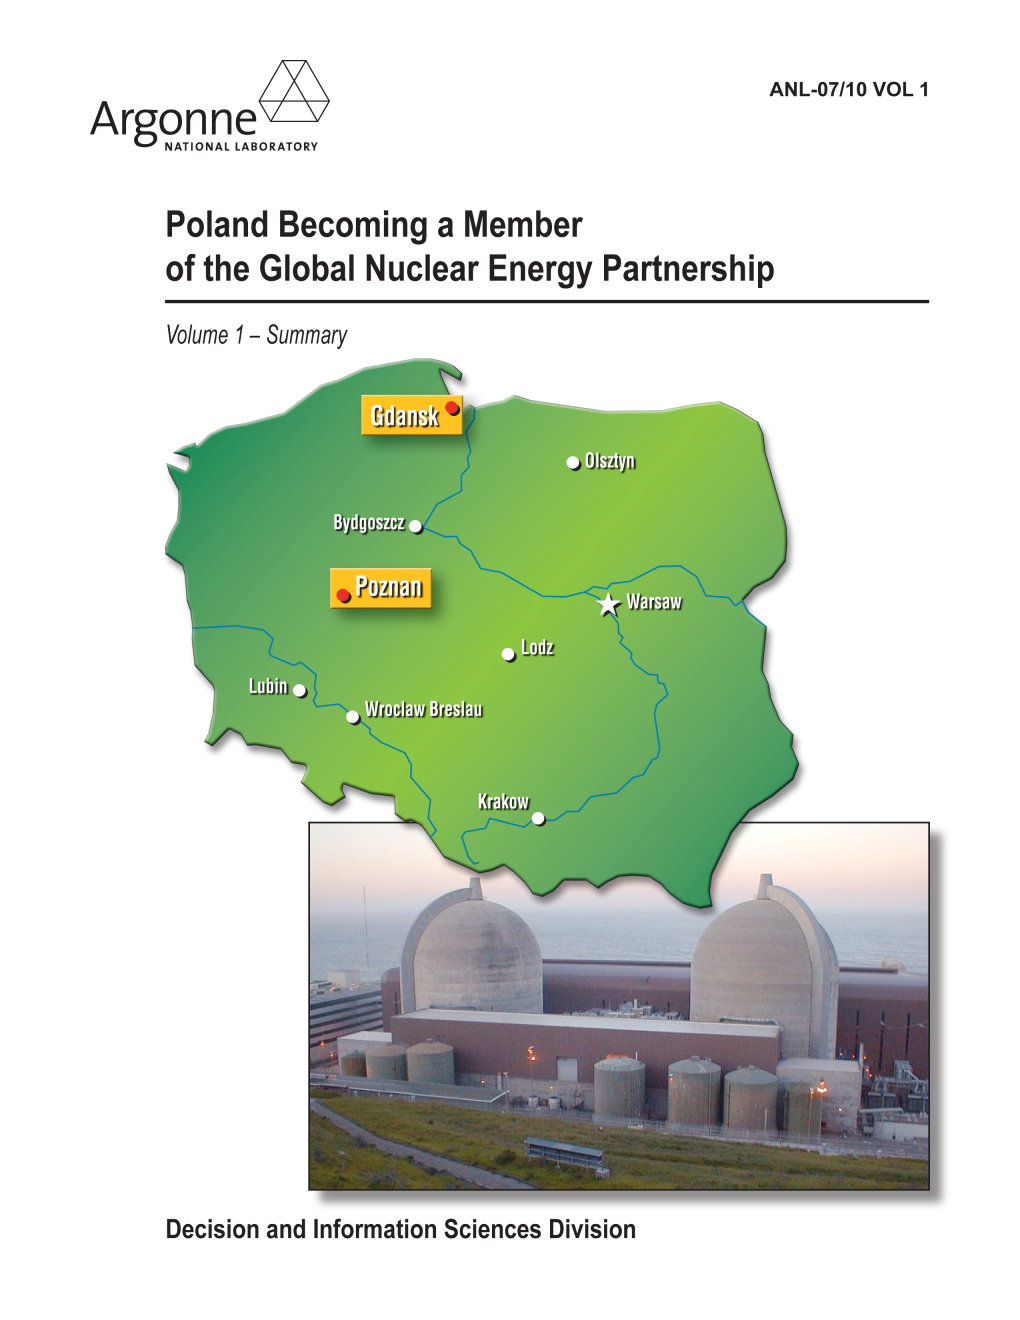 Poland Becoming a Member of the Global Nuclear Energy Partnership